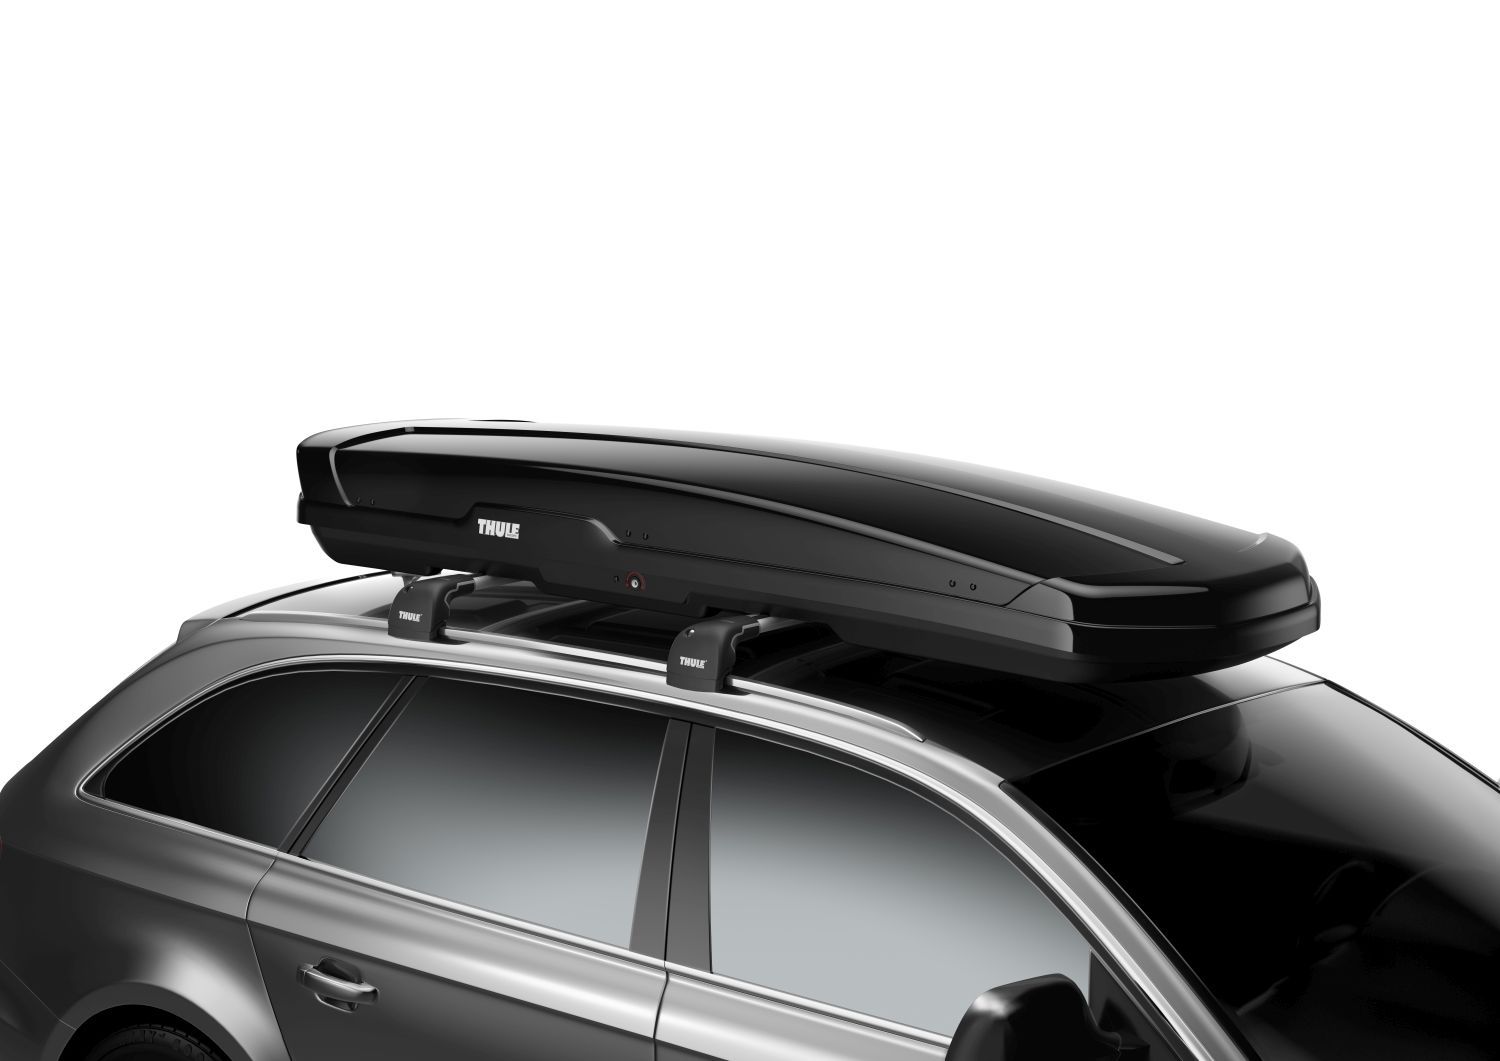 Thule presents Thule Flow - a roof-mounted ski rack for winter sports fans – main image